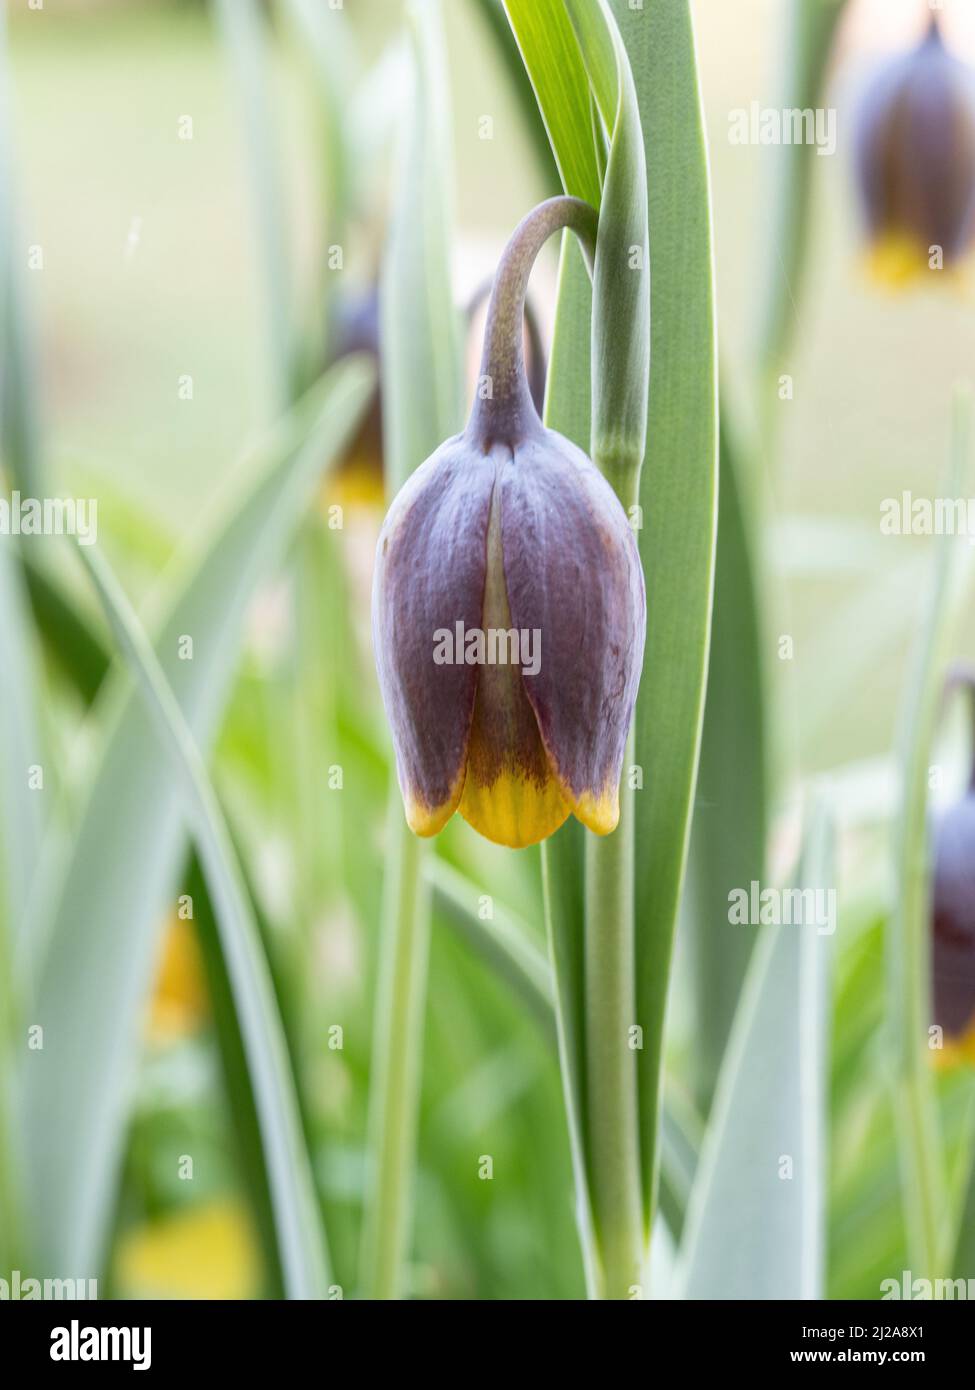 A close up of a single mahogany and yellow bell shaped flower of Fritillaria uva-vulpis Stock Photo